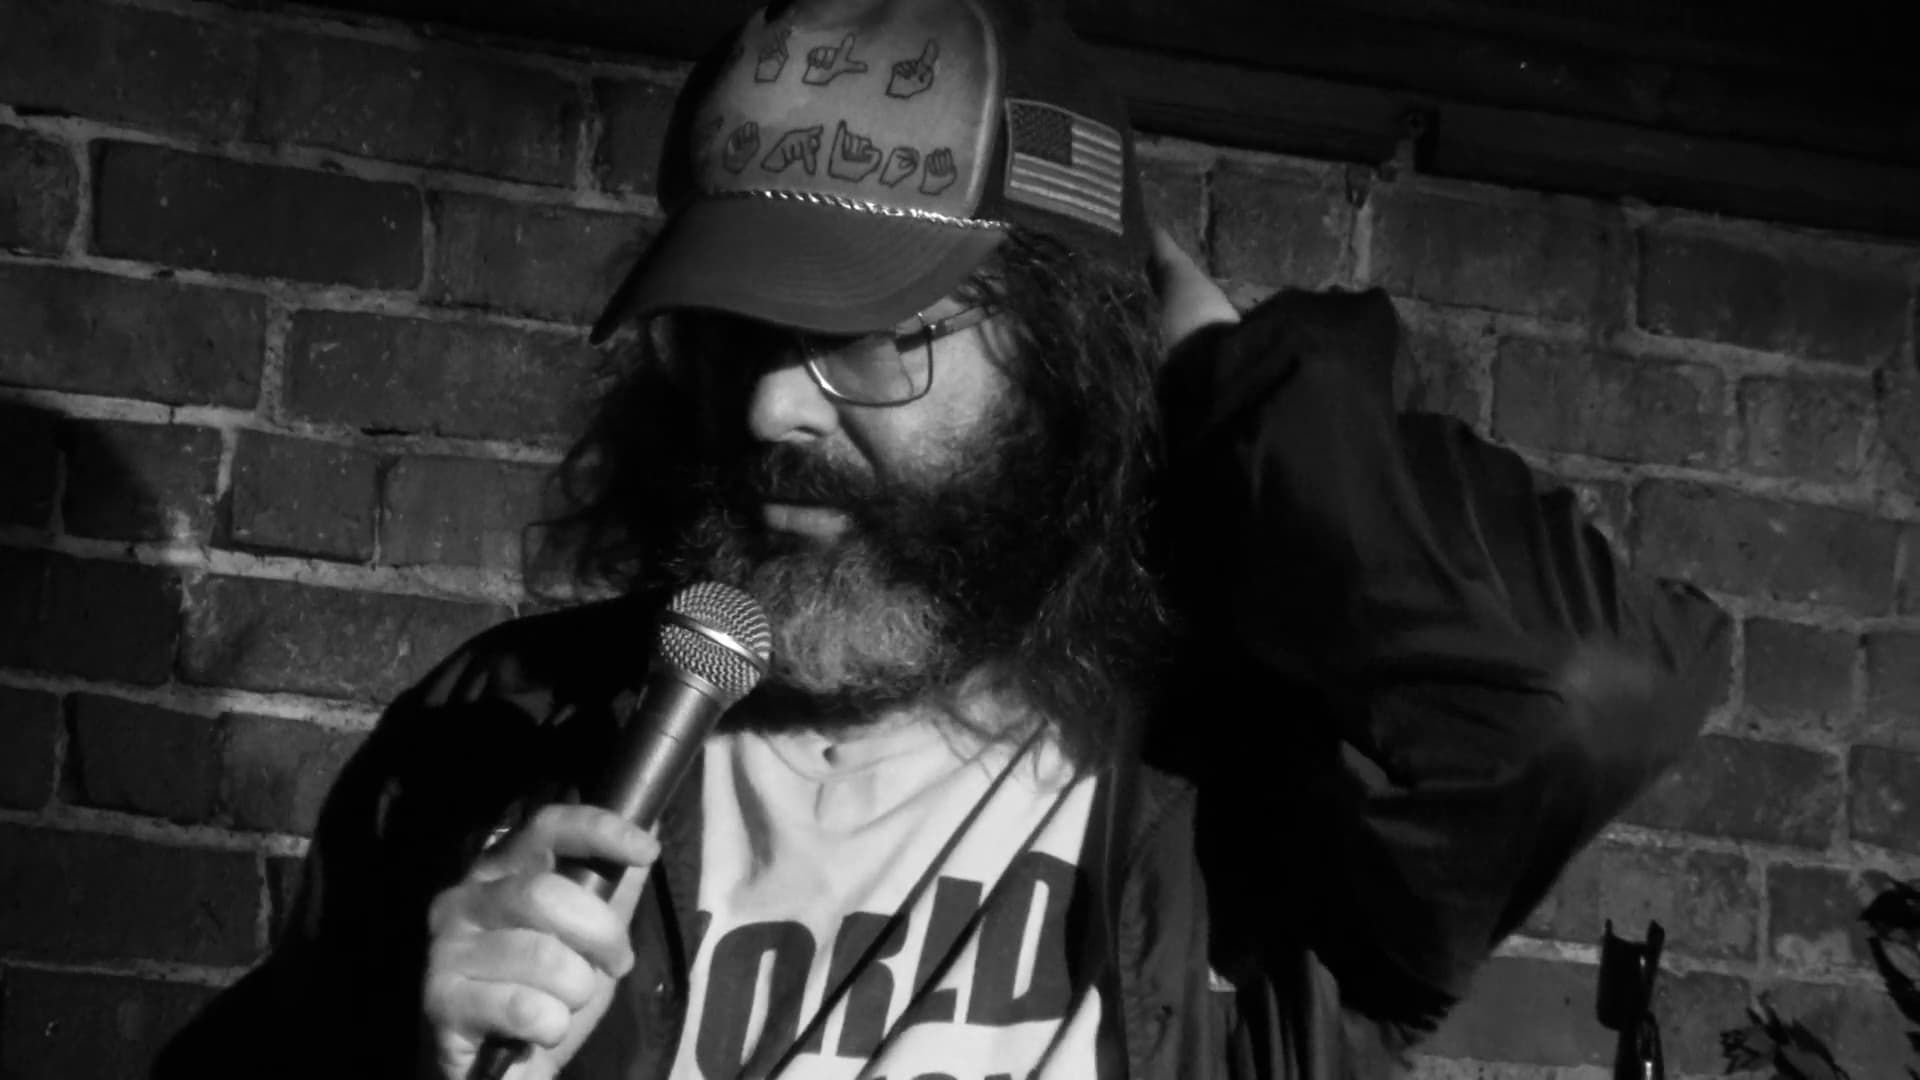 Judah Friedlander: America is the Greatest Country in the United States background